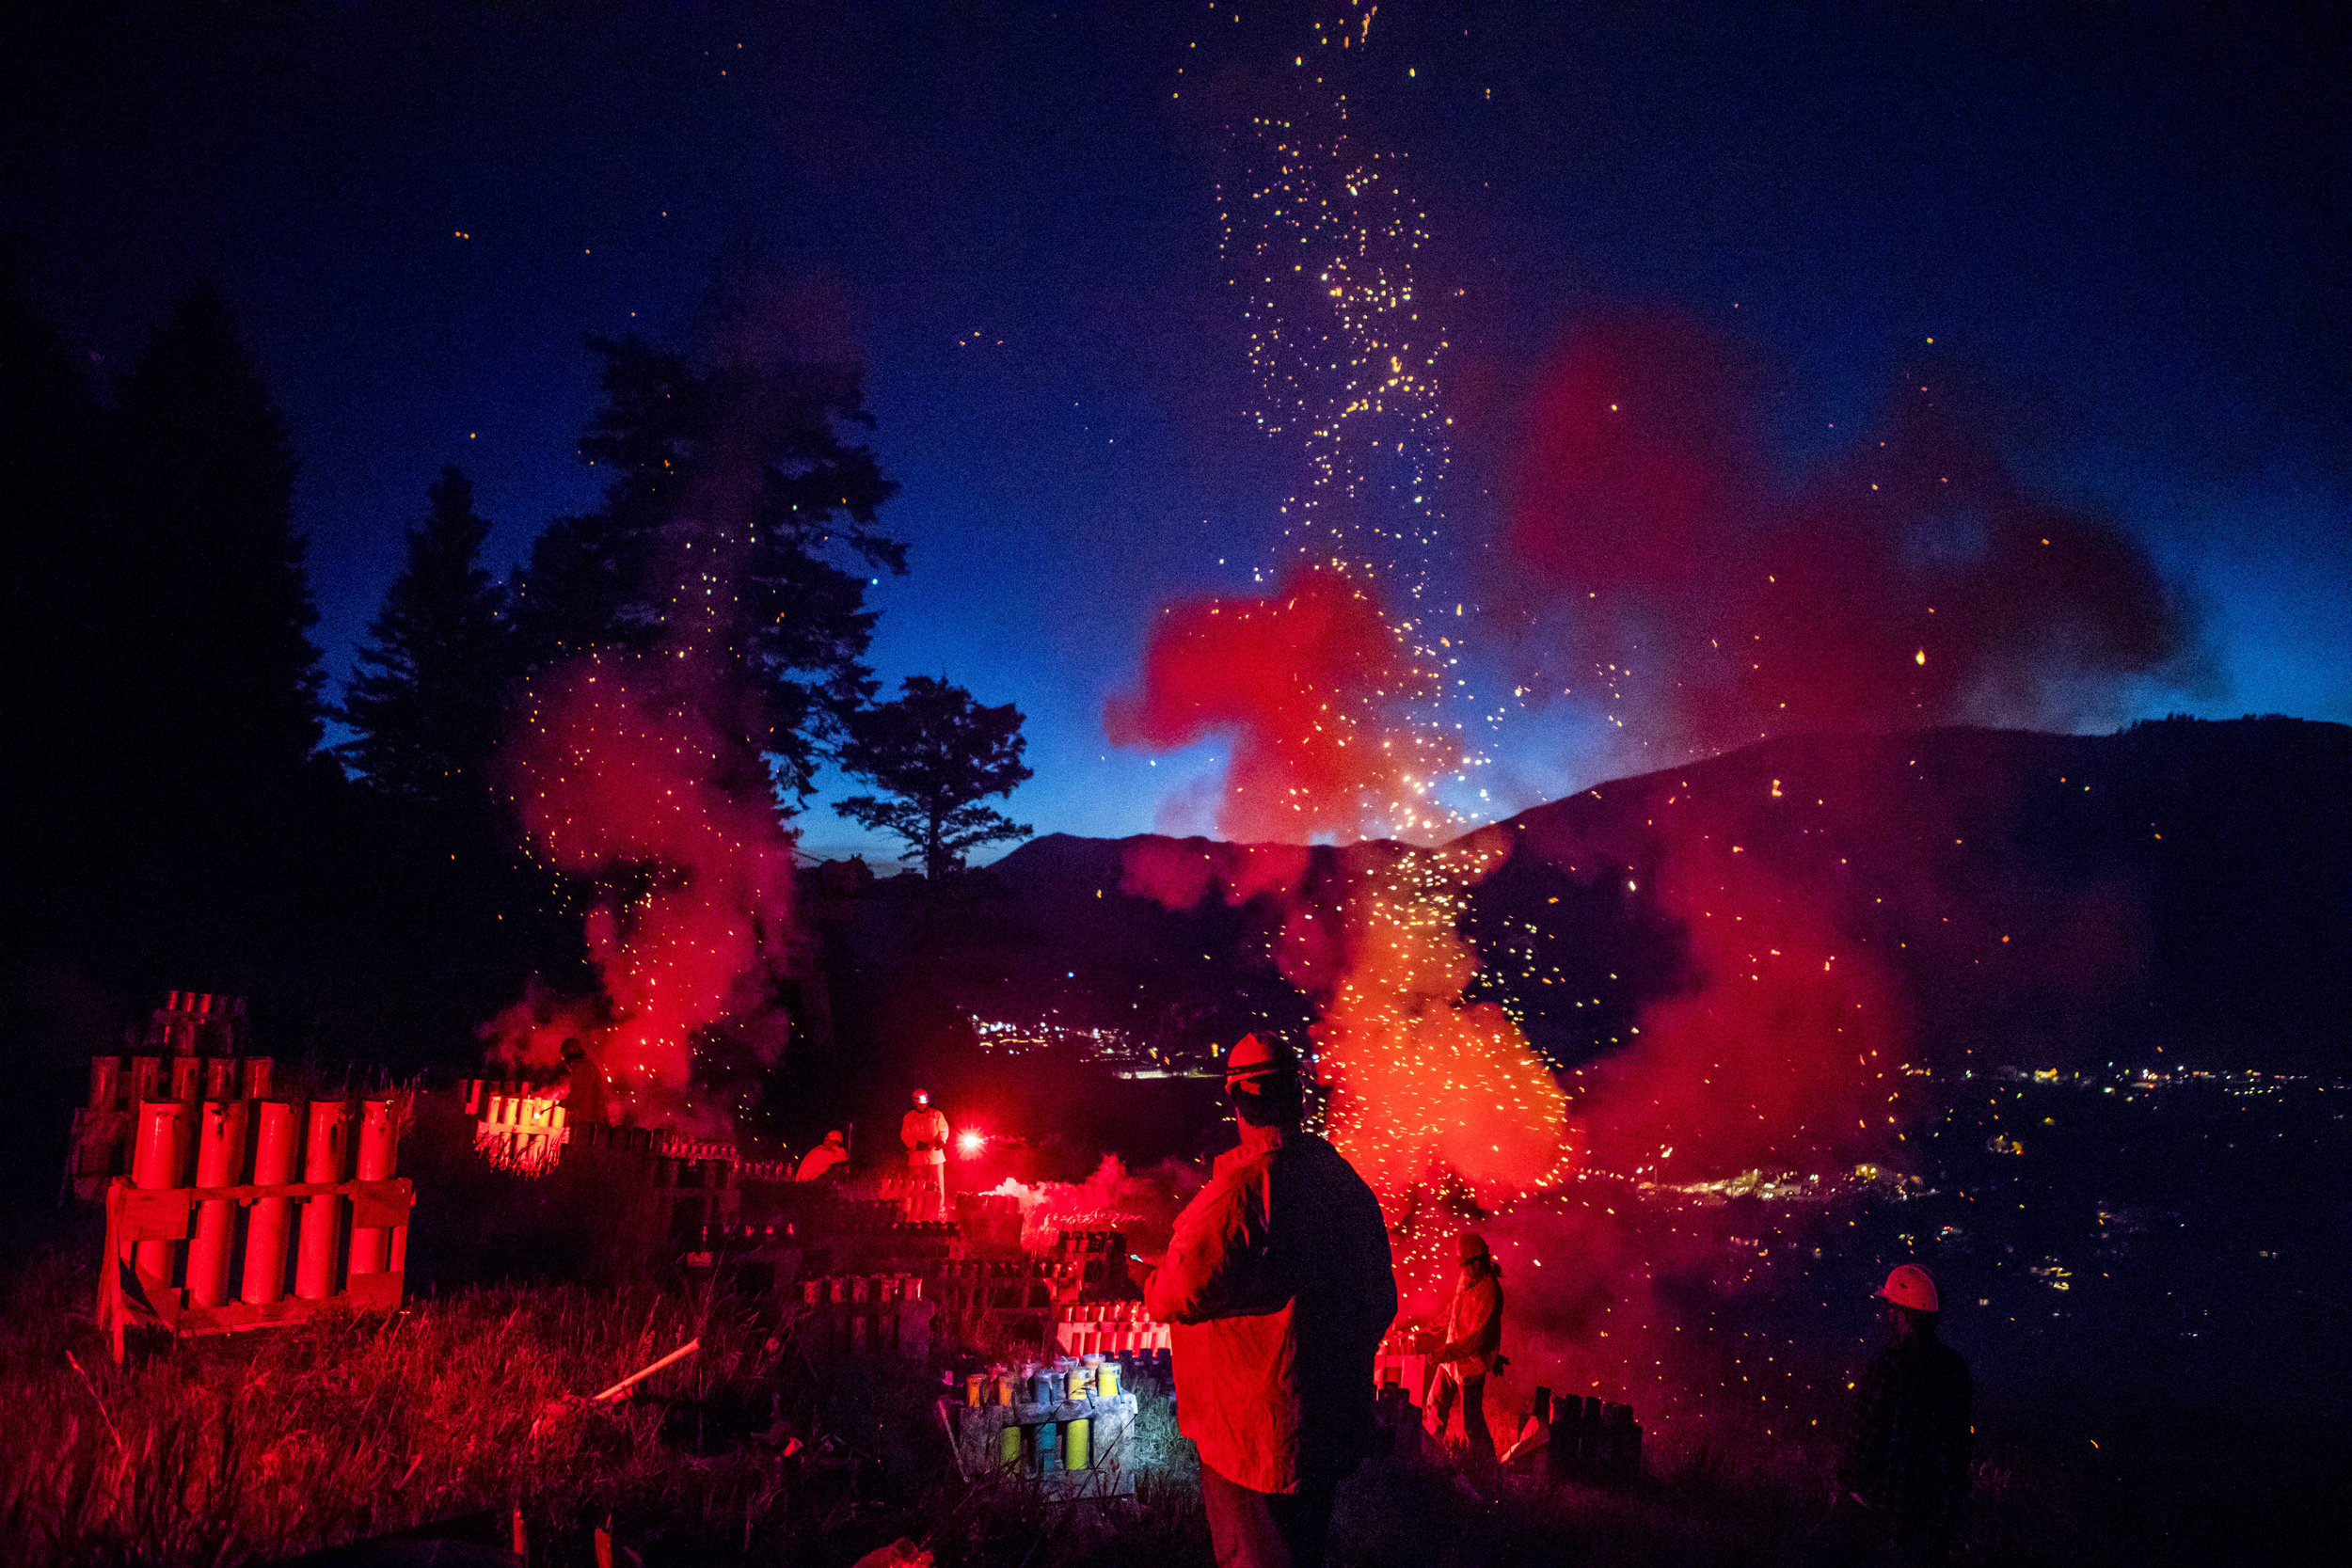  Bob Hammond conducts volunteers as they light off the Fourth of July fireworks display from Snow King Mountain in Jackson, Wyo. Hammond has led the display for over 20 years. 